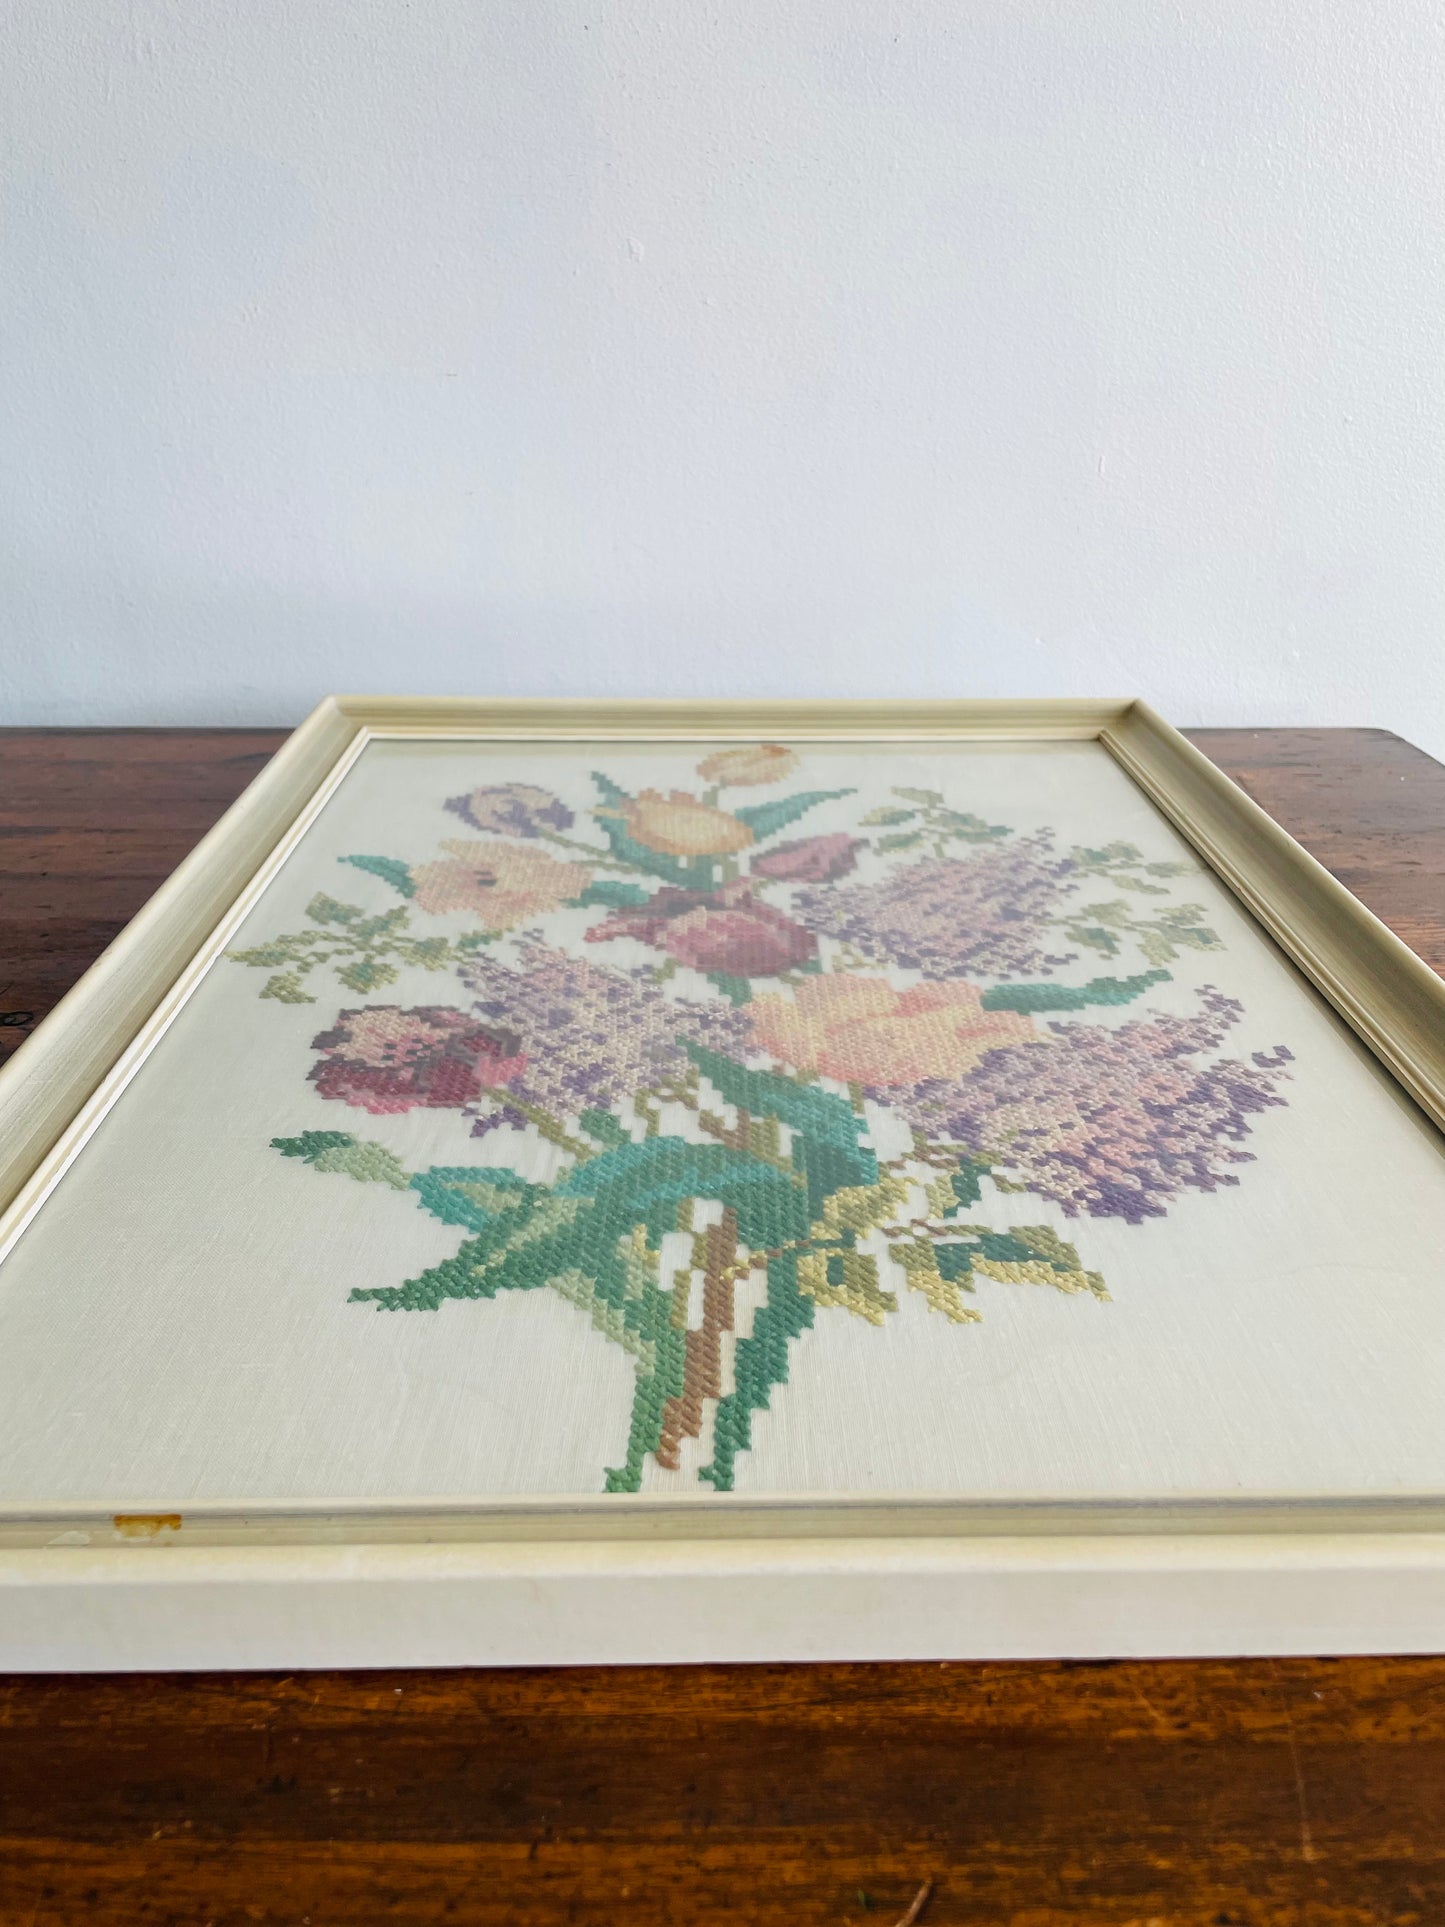 Framed Floral Bouquet Cross-Stitch Needlepoint Embroidery Picture on White Background